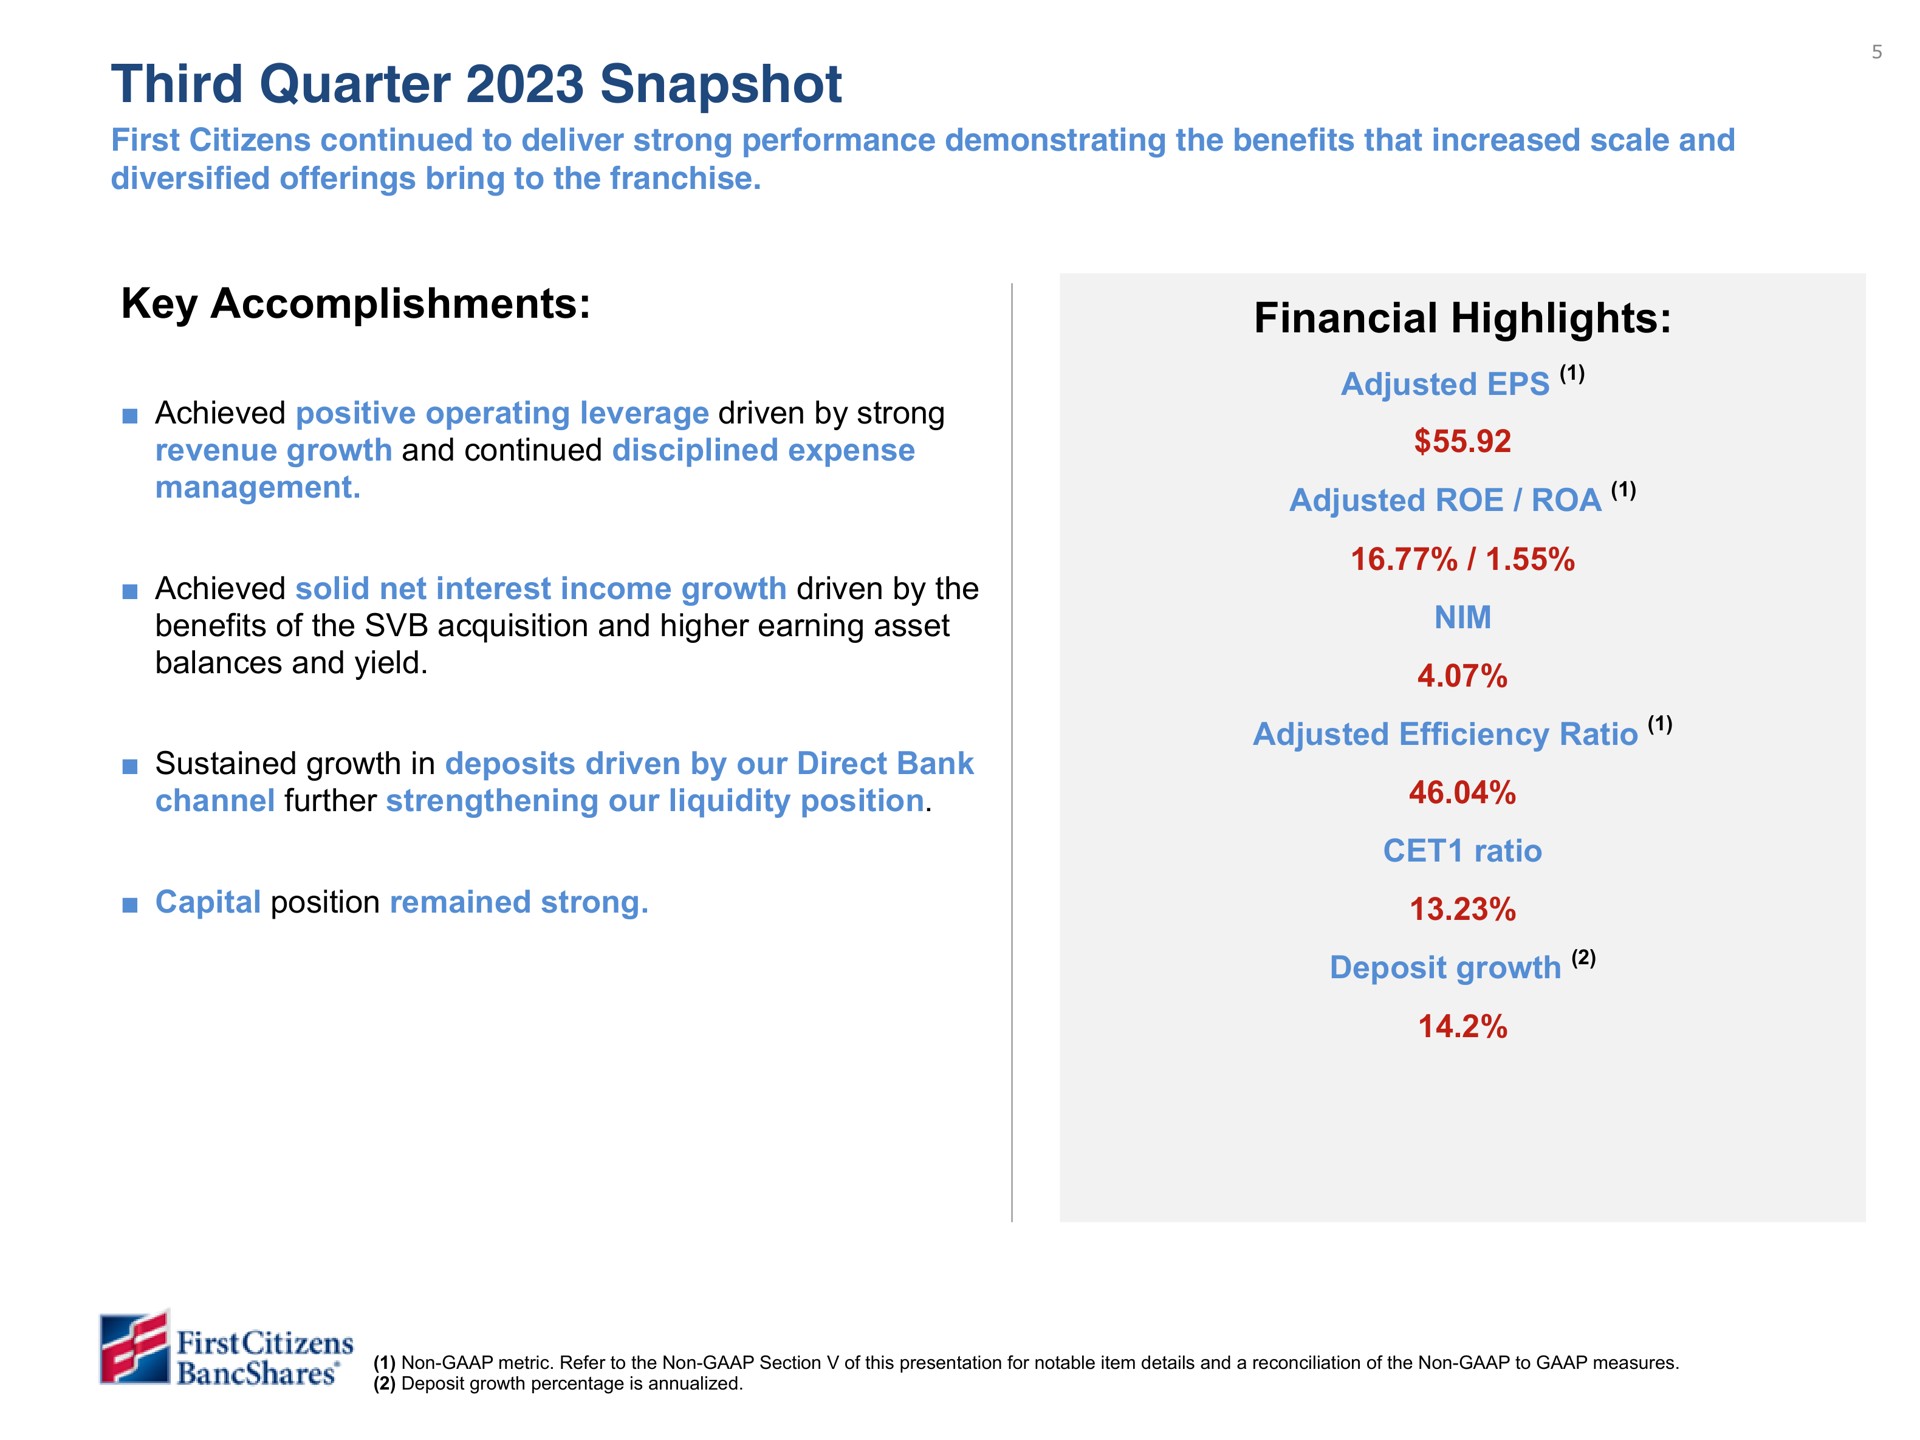 third quarter snapshot key accomplishments financial highlights adjusted efficiency ratio deposit growth | First Citizens BancShares